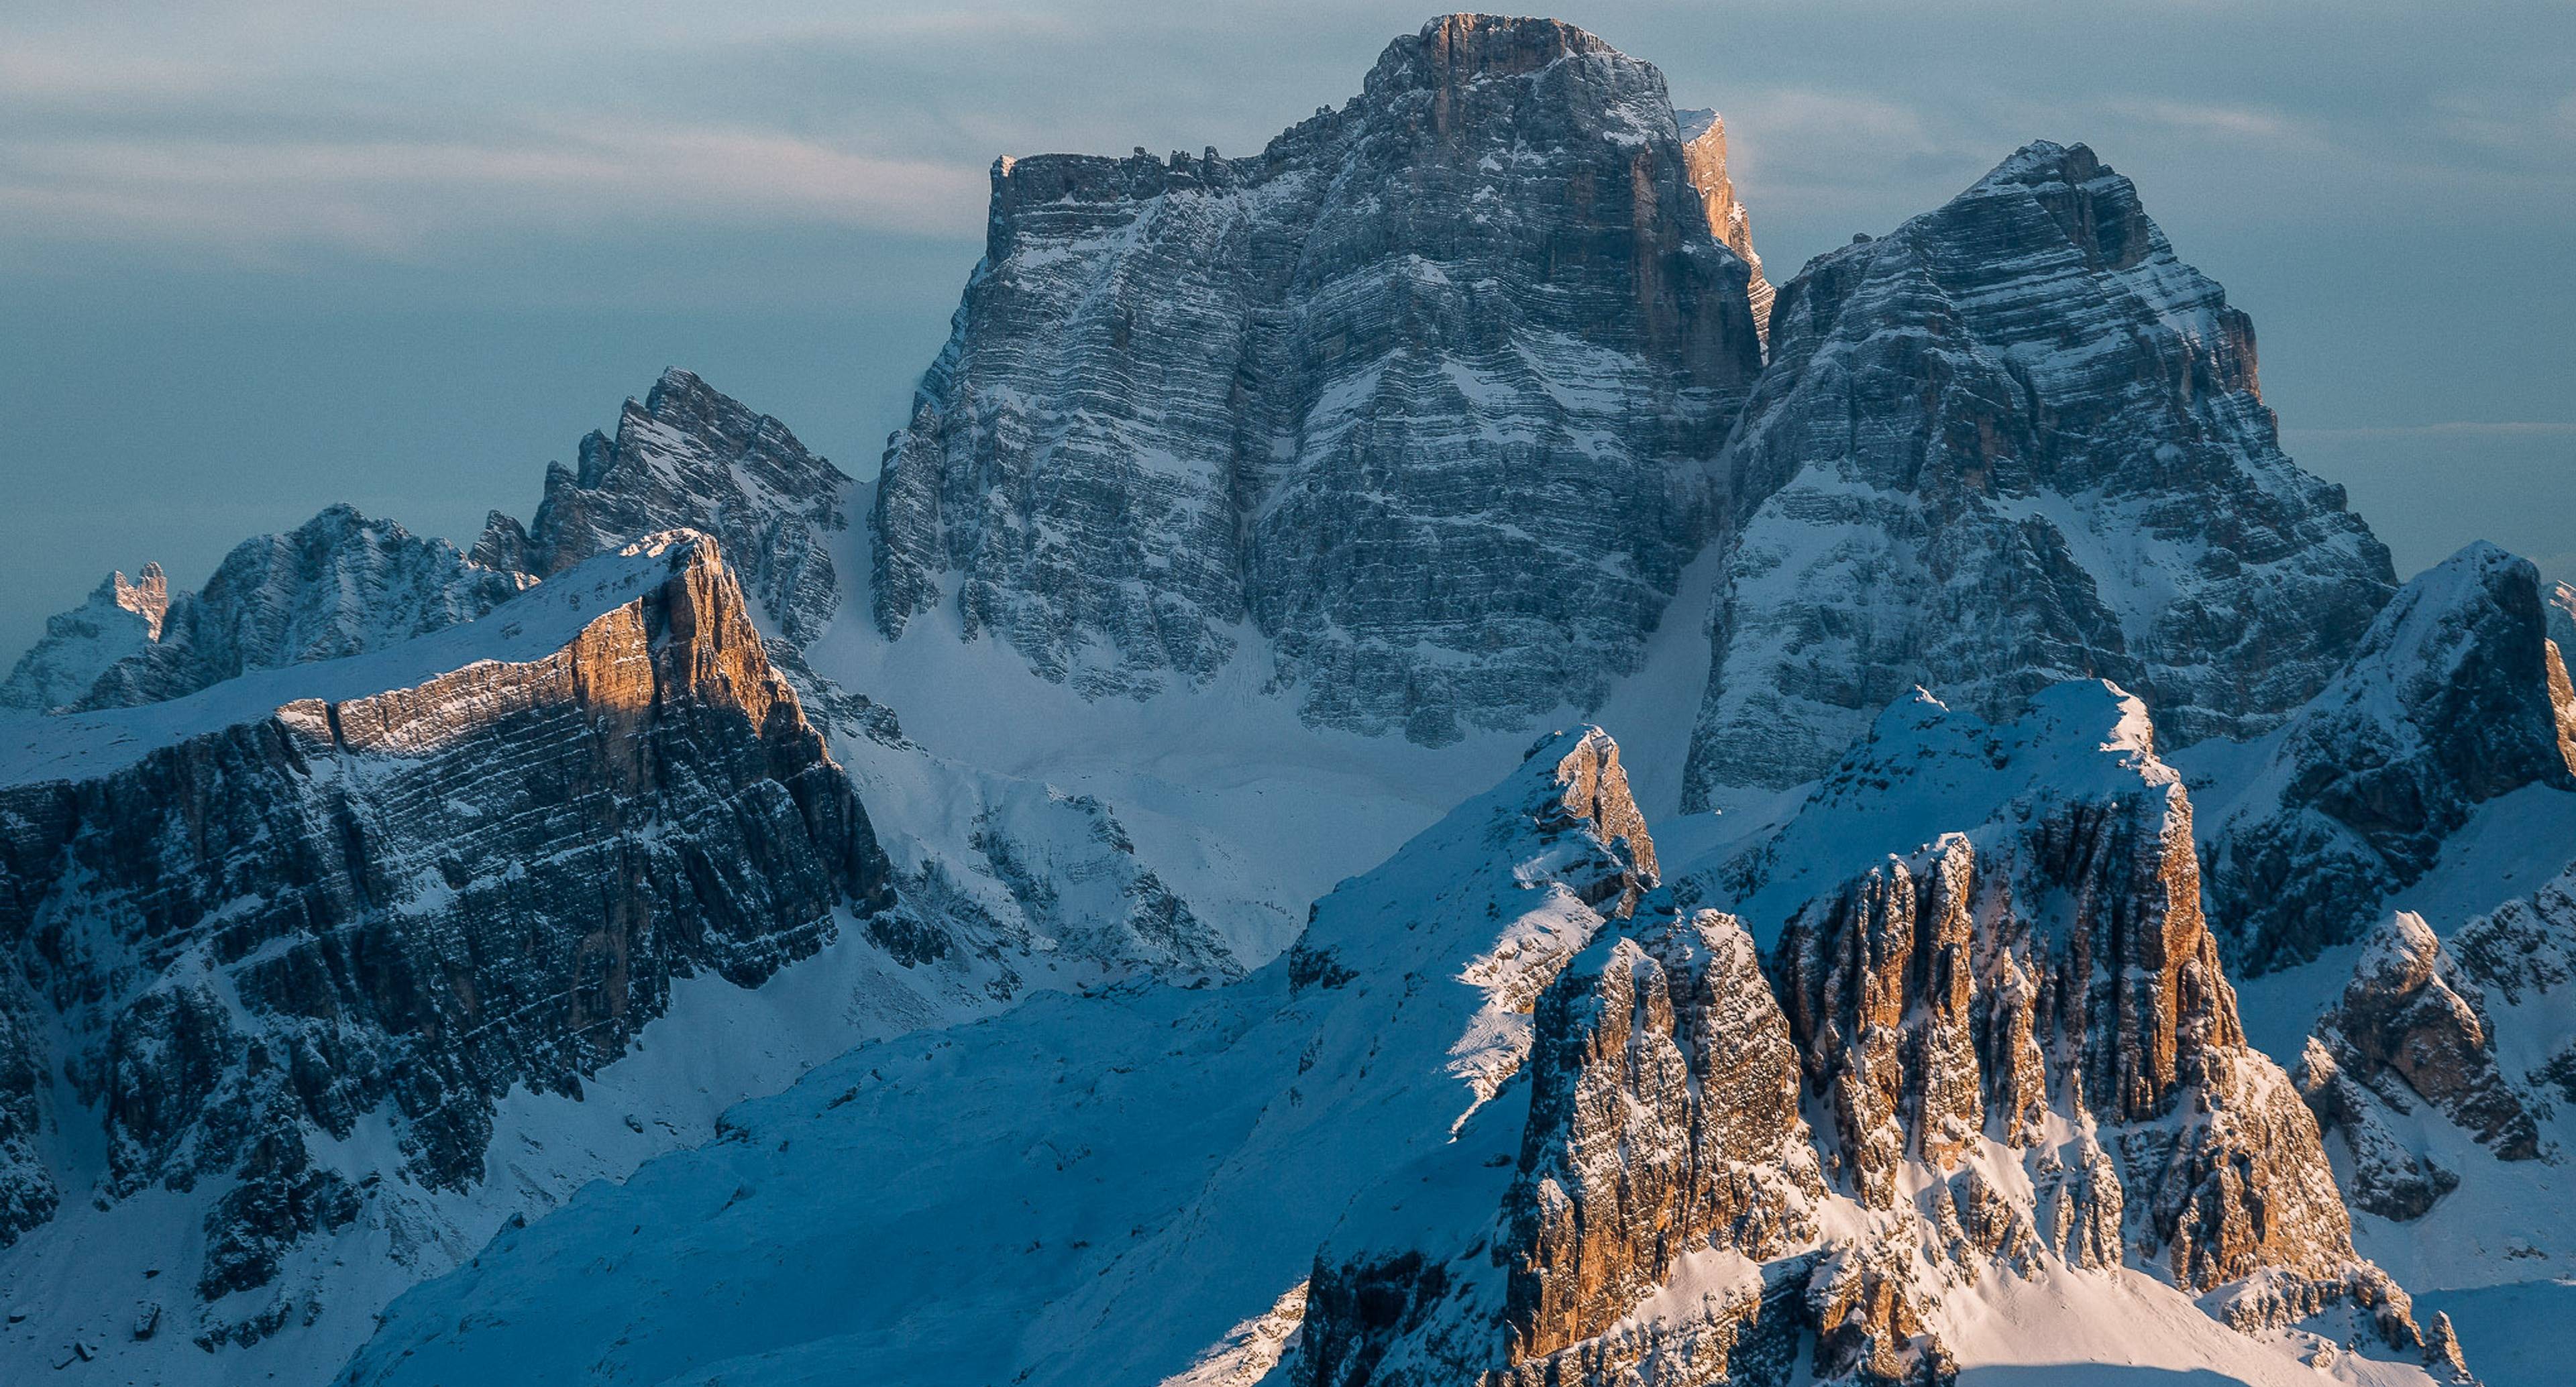 Getting to know the Dolomites